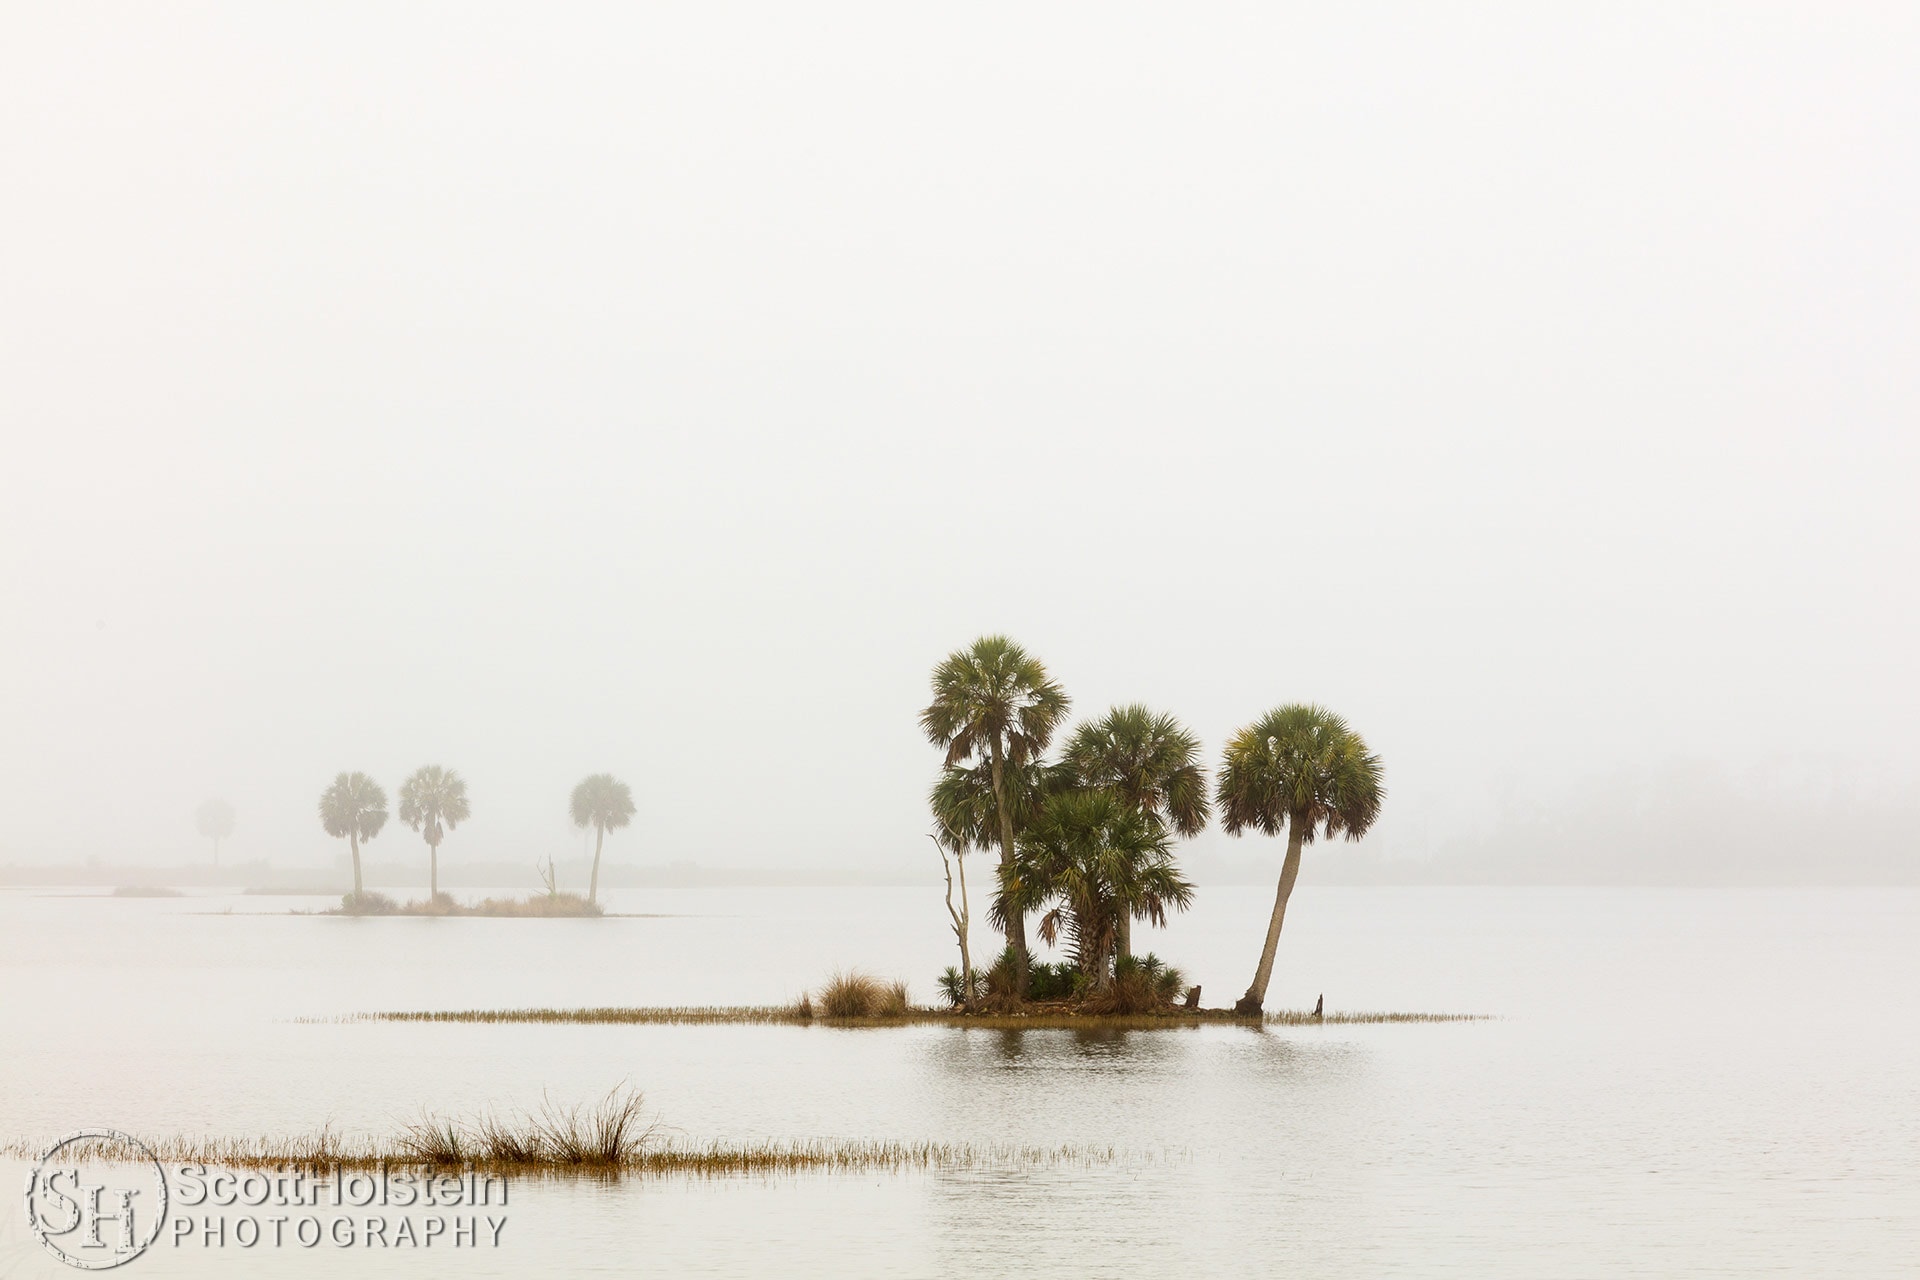 St. Marks Foggy Palms landscape photograph is a heavily white, minimalist image of tiny palm tree islands in the water fading into a fog bank at St. Marks National Wildlife Refuge in Florida.